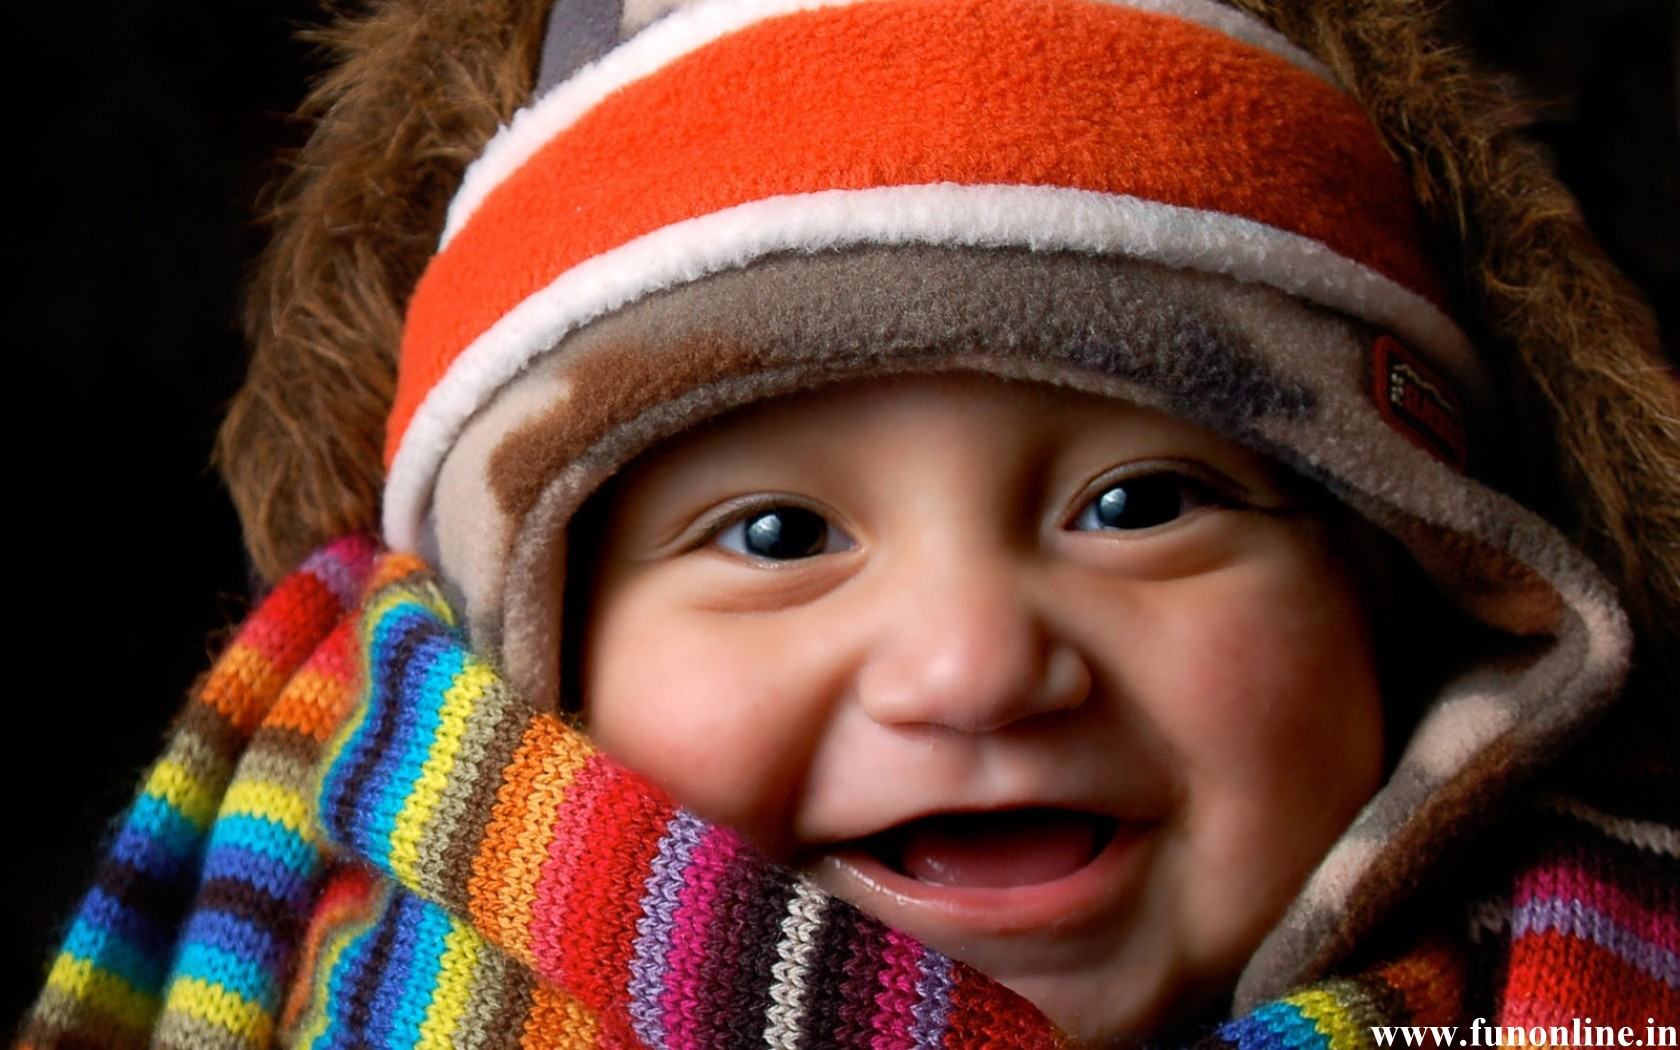 Cute Baby Smiling HD Wallpapers Cute Baby Backgrounds